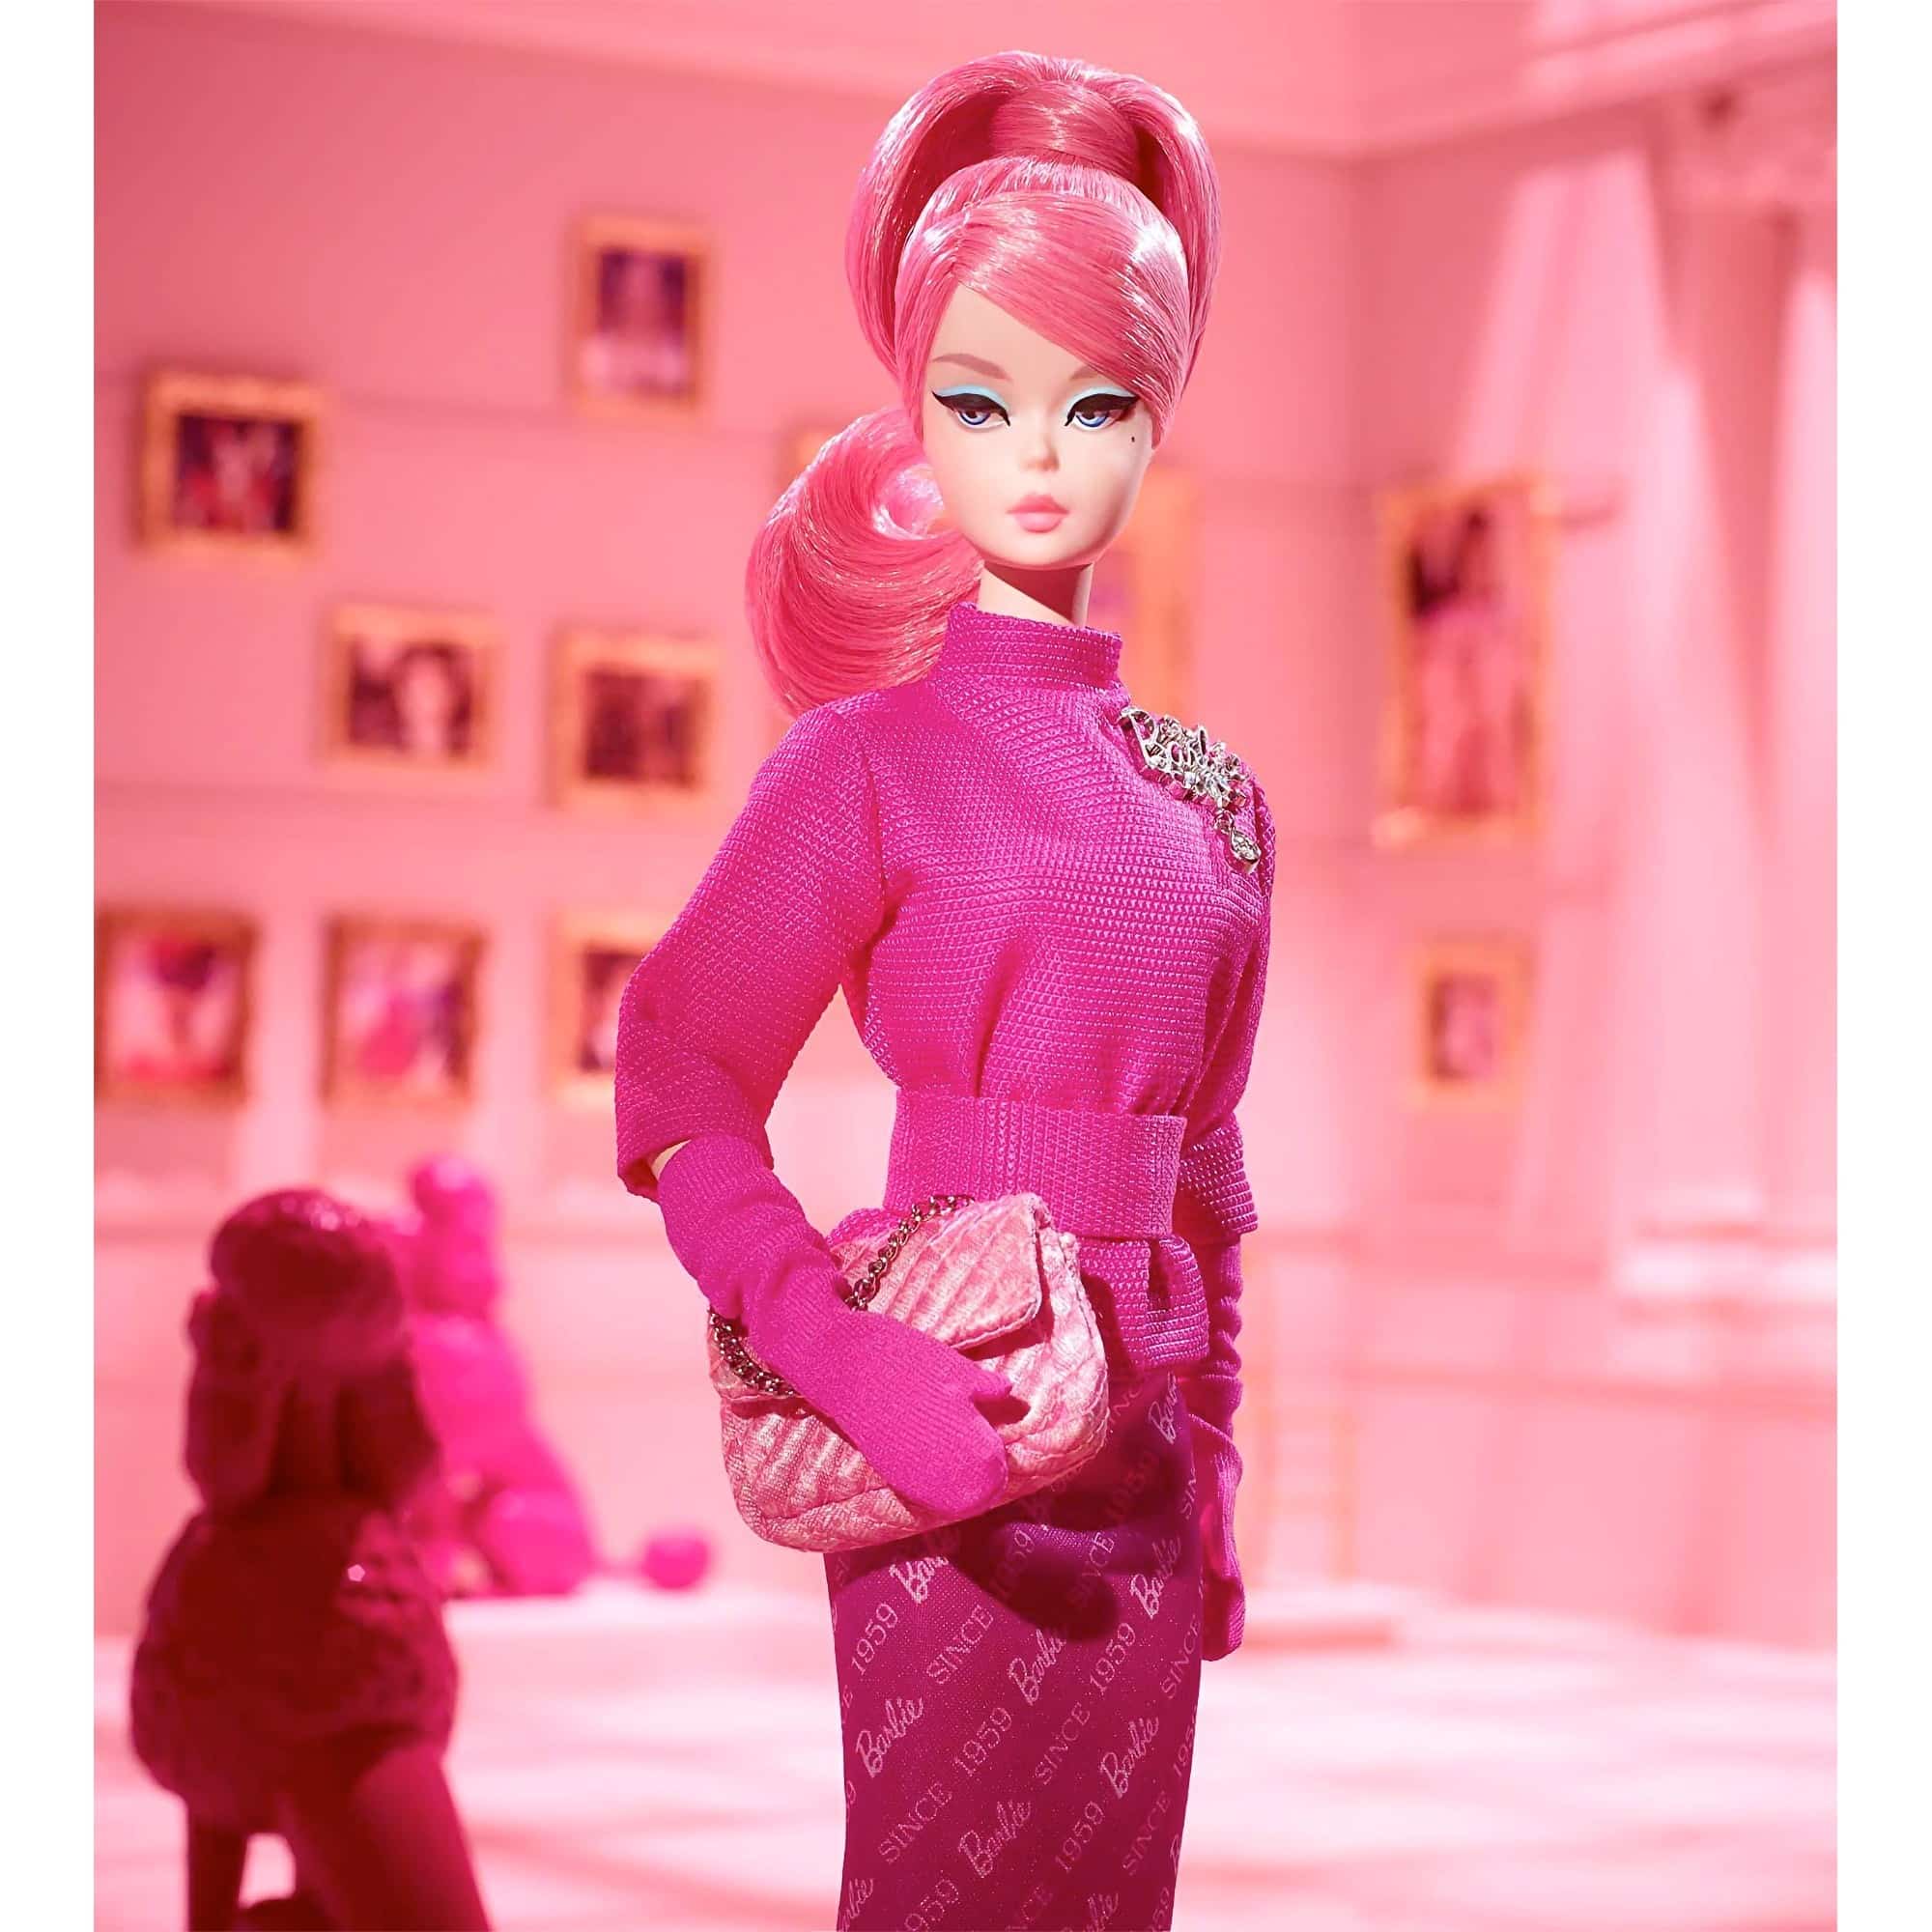 Barbie Signature - 60th Anniversary BFMC - Proudly Pink Doll